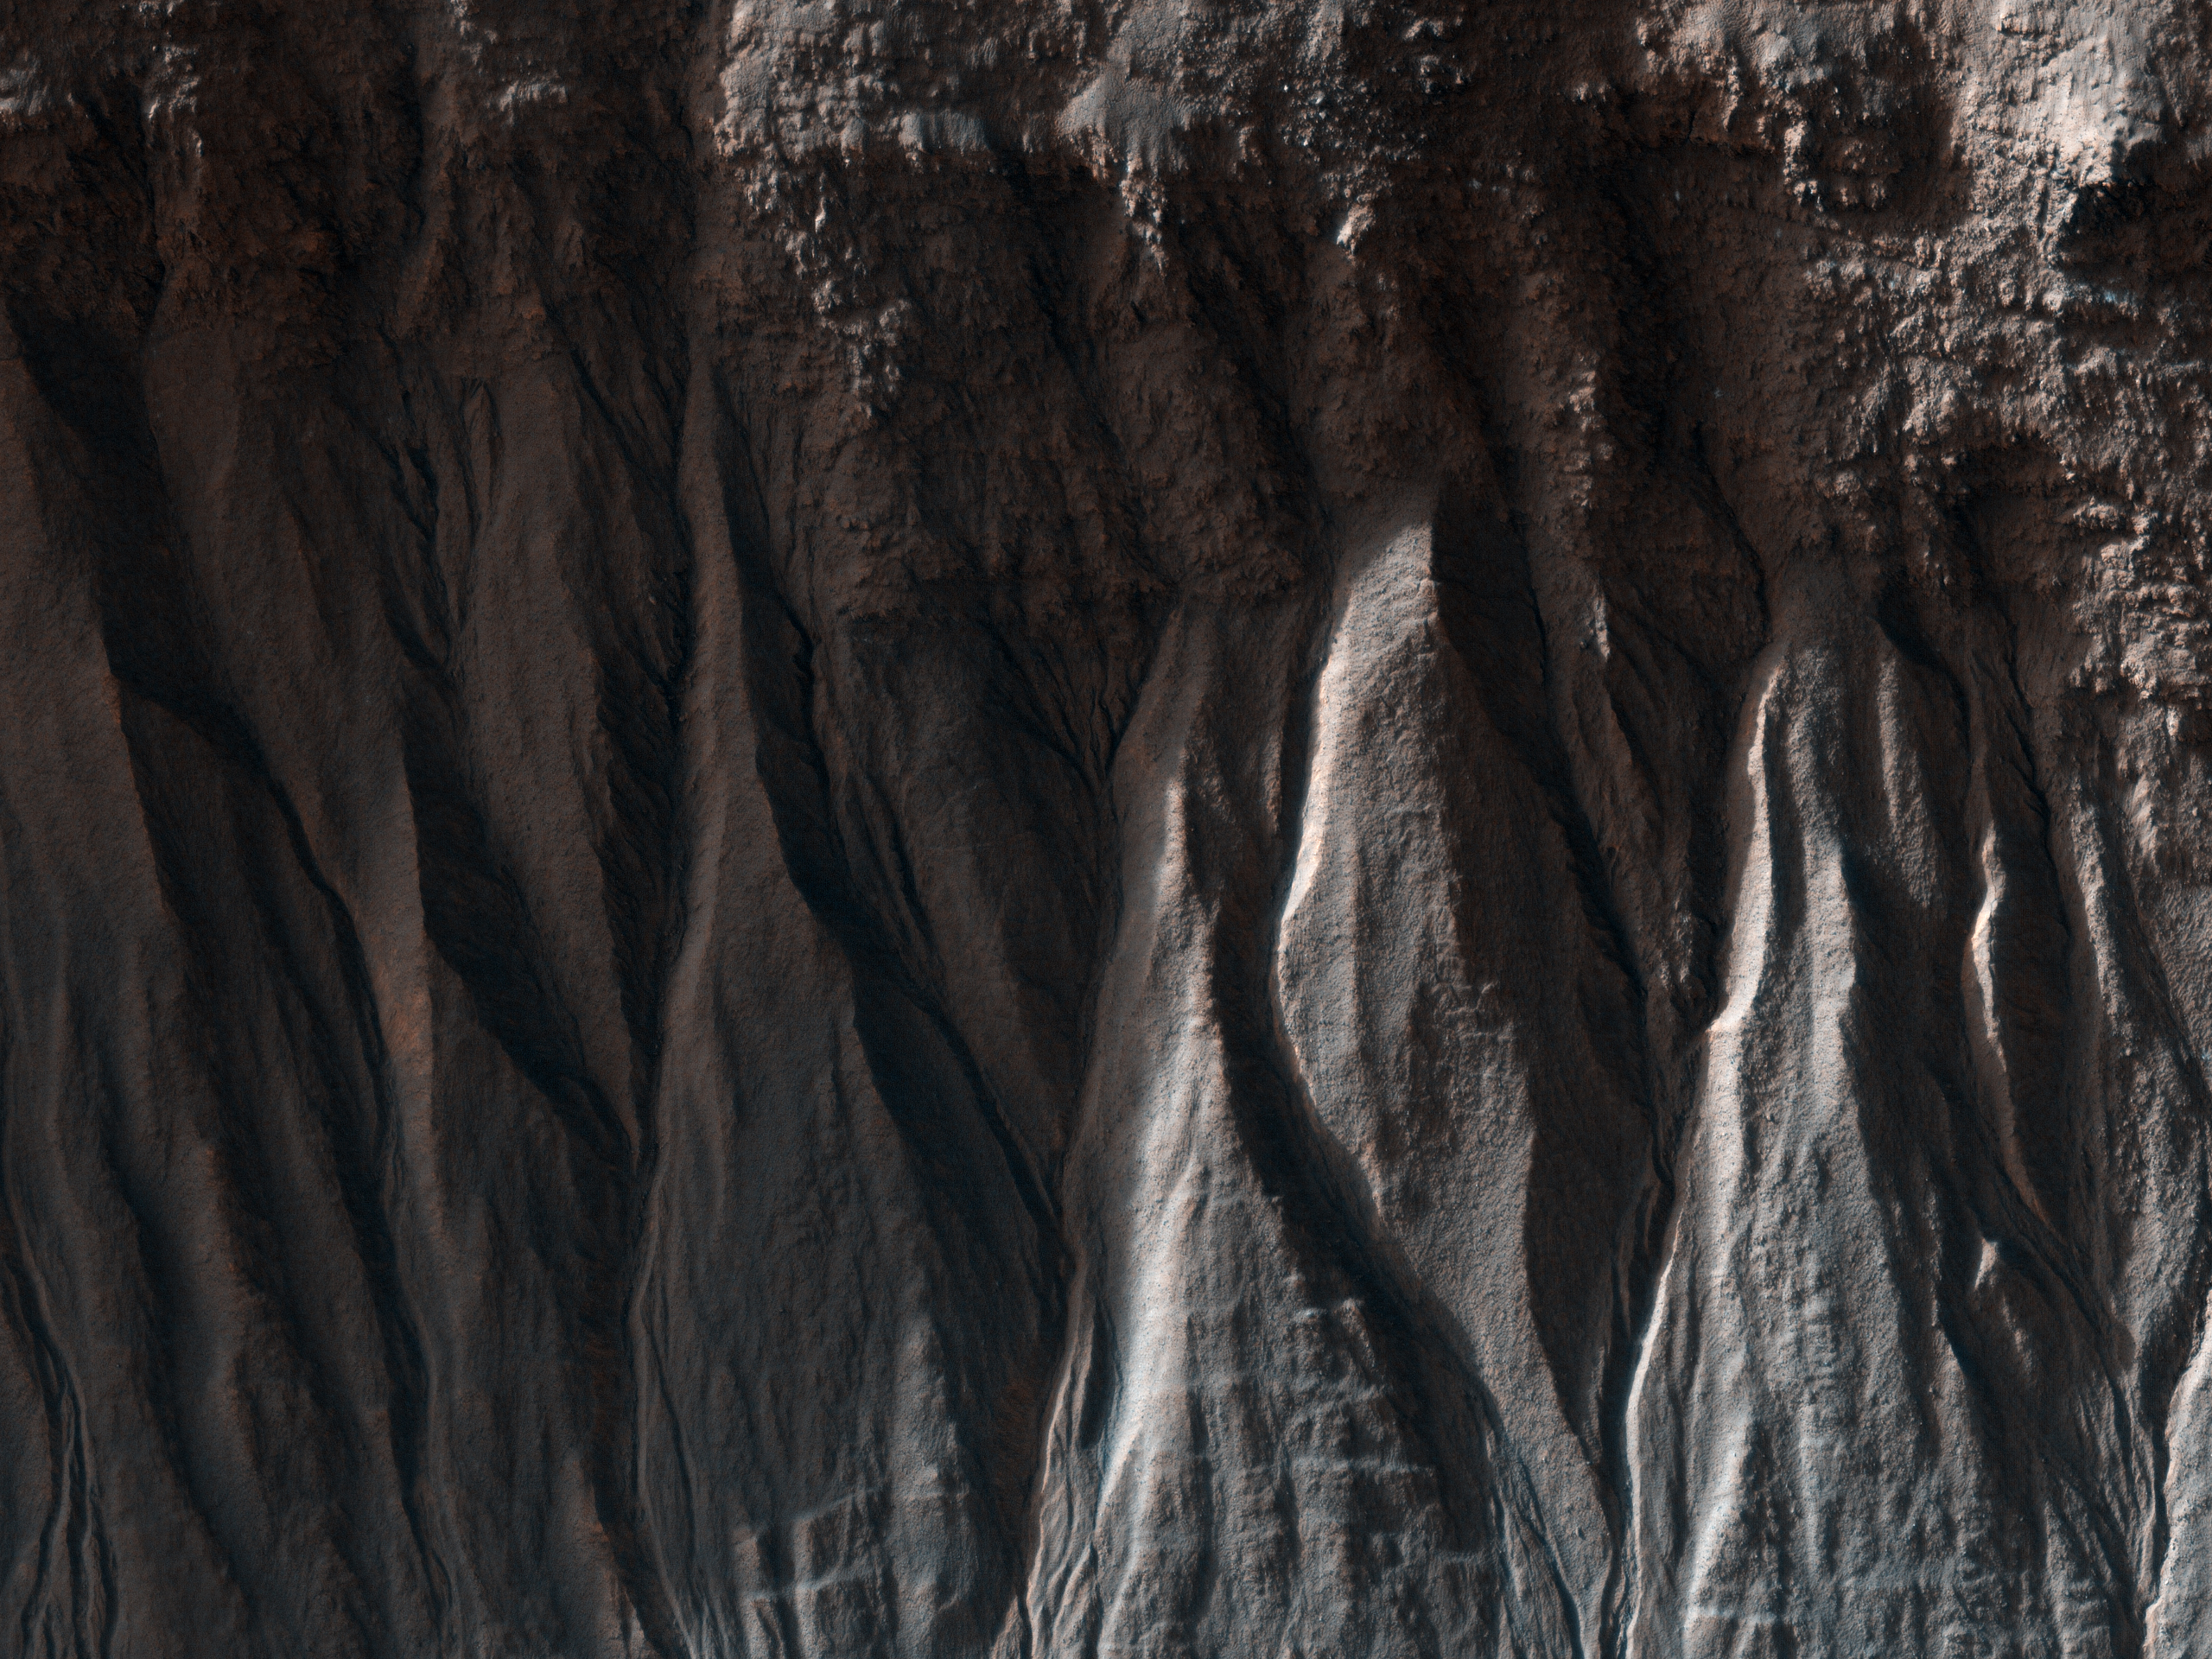 Gullies and Ice-Rich Material